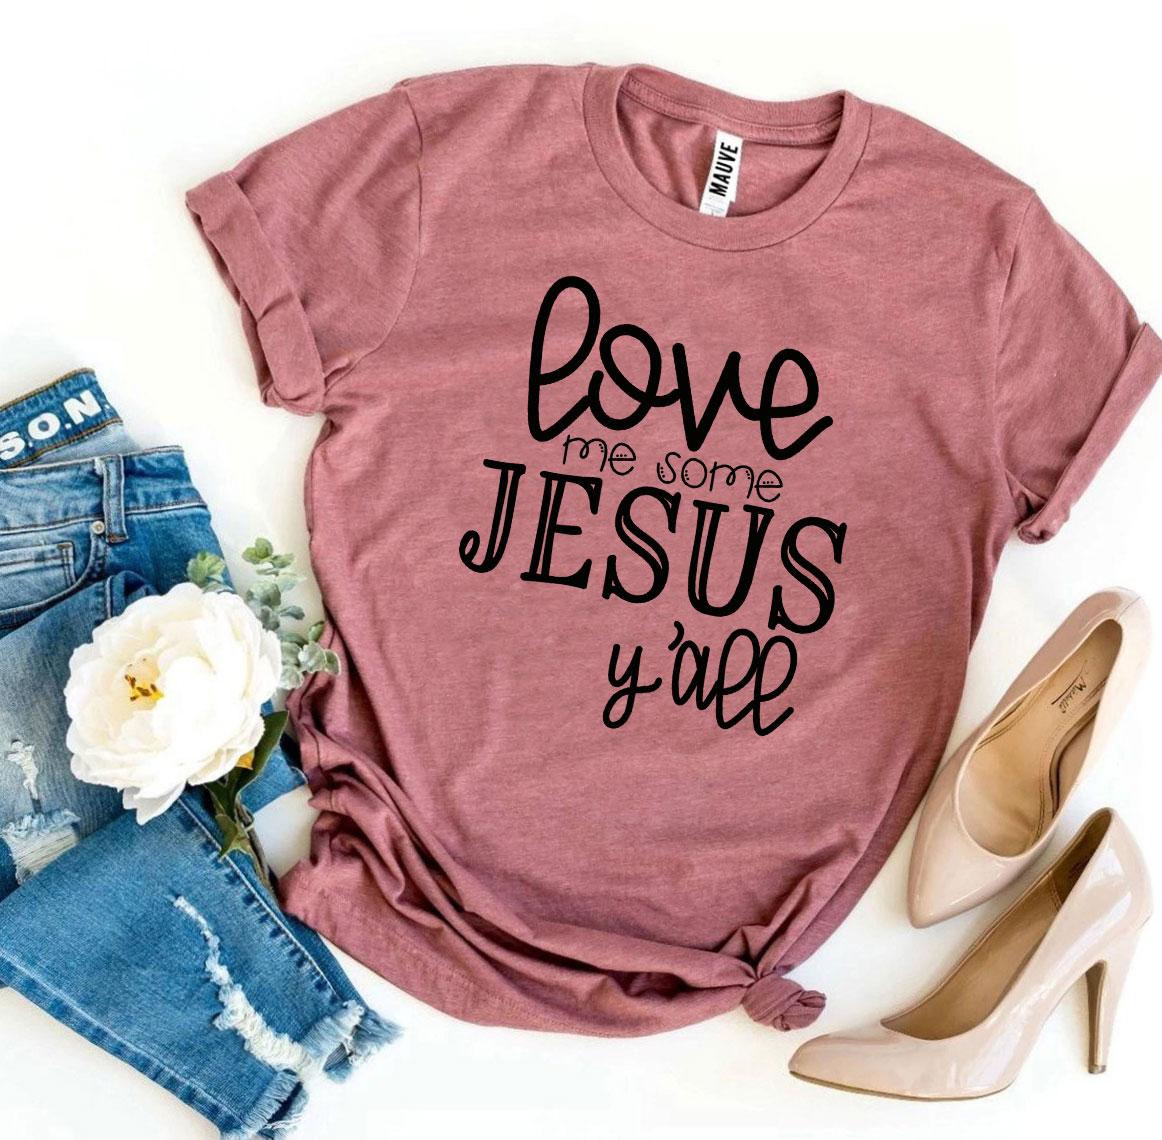 Love Me Some Jesus Y’all T-shirt